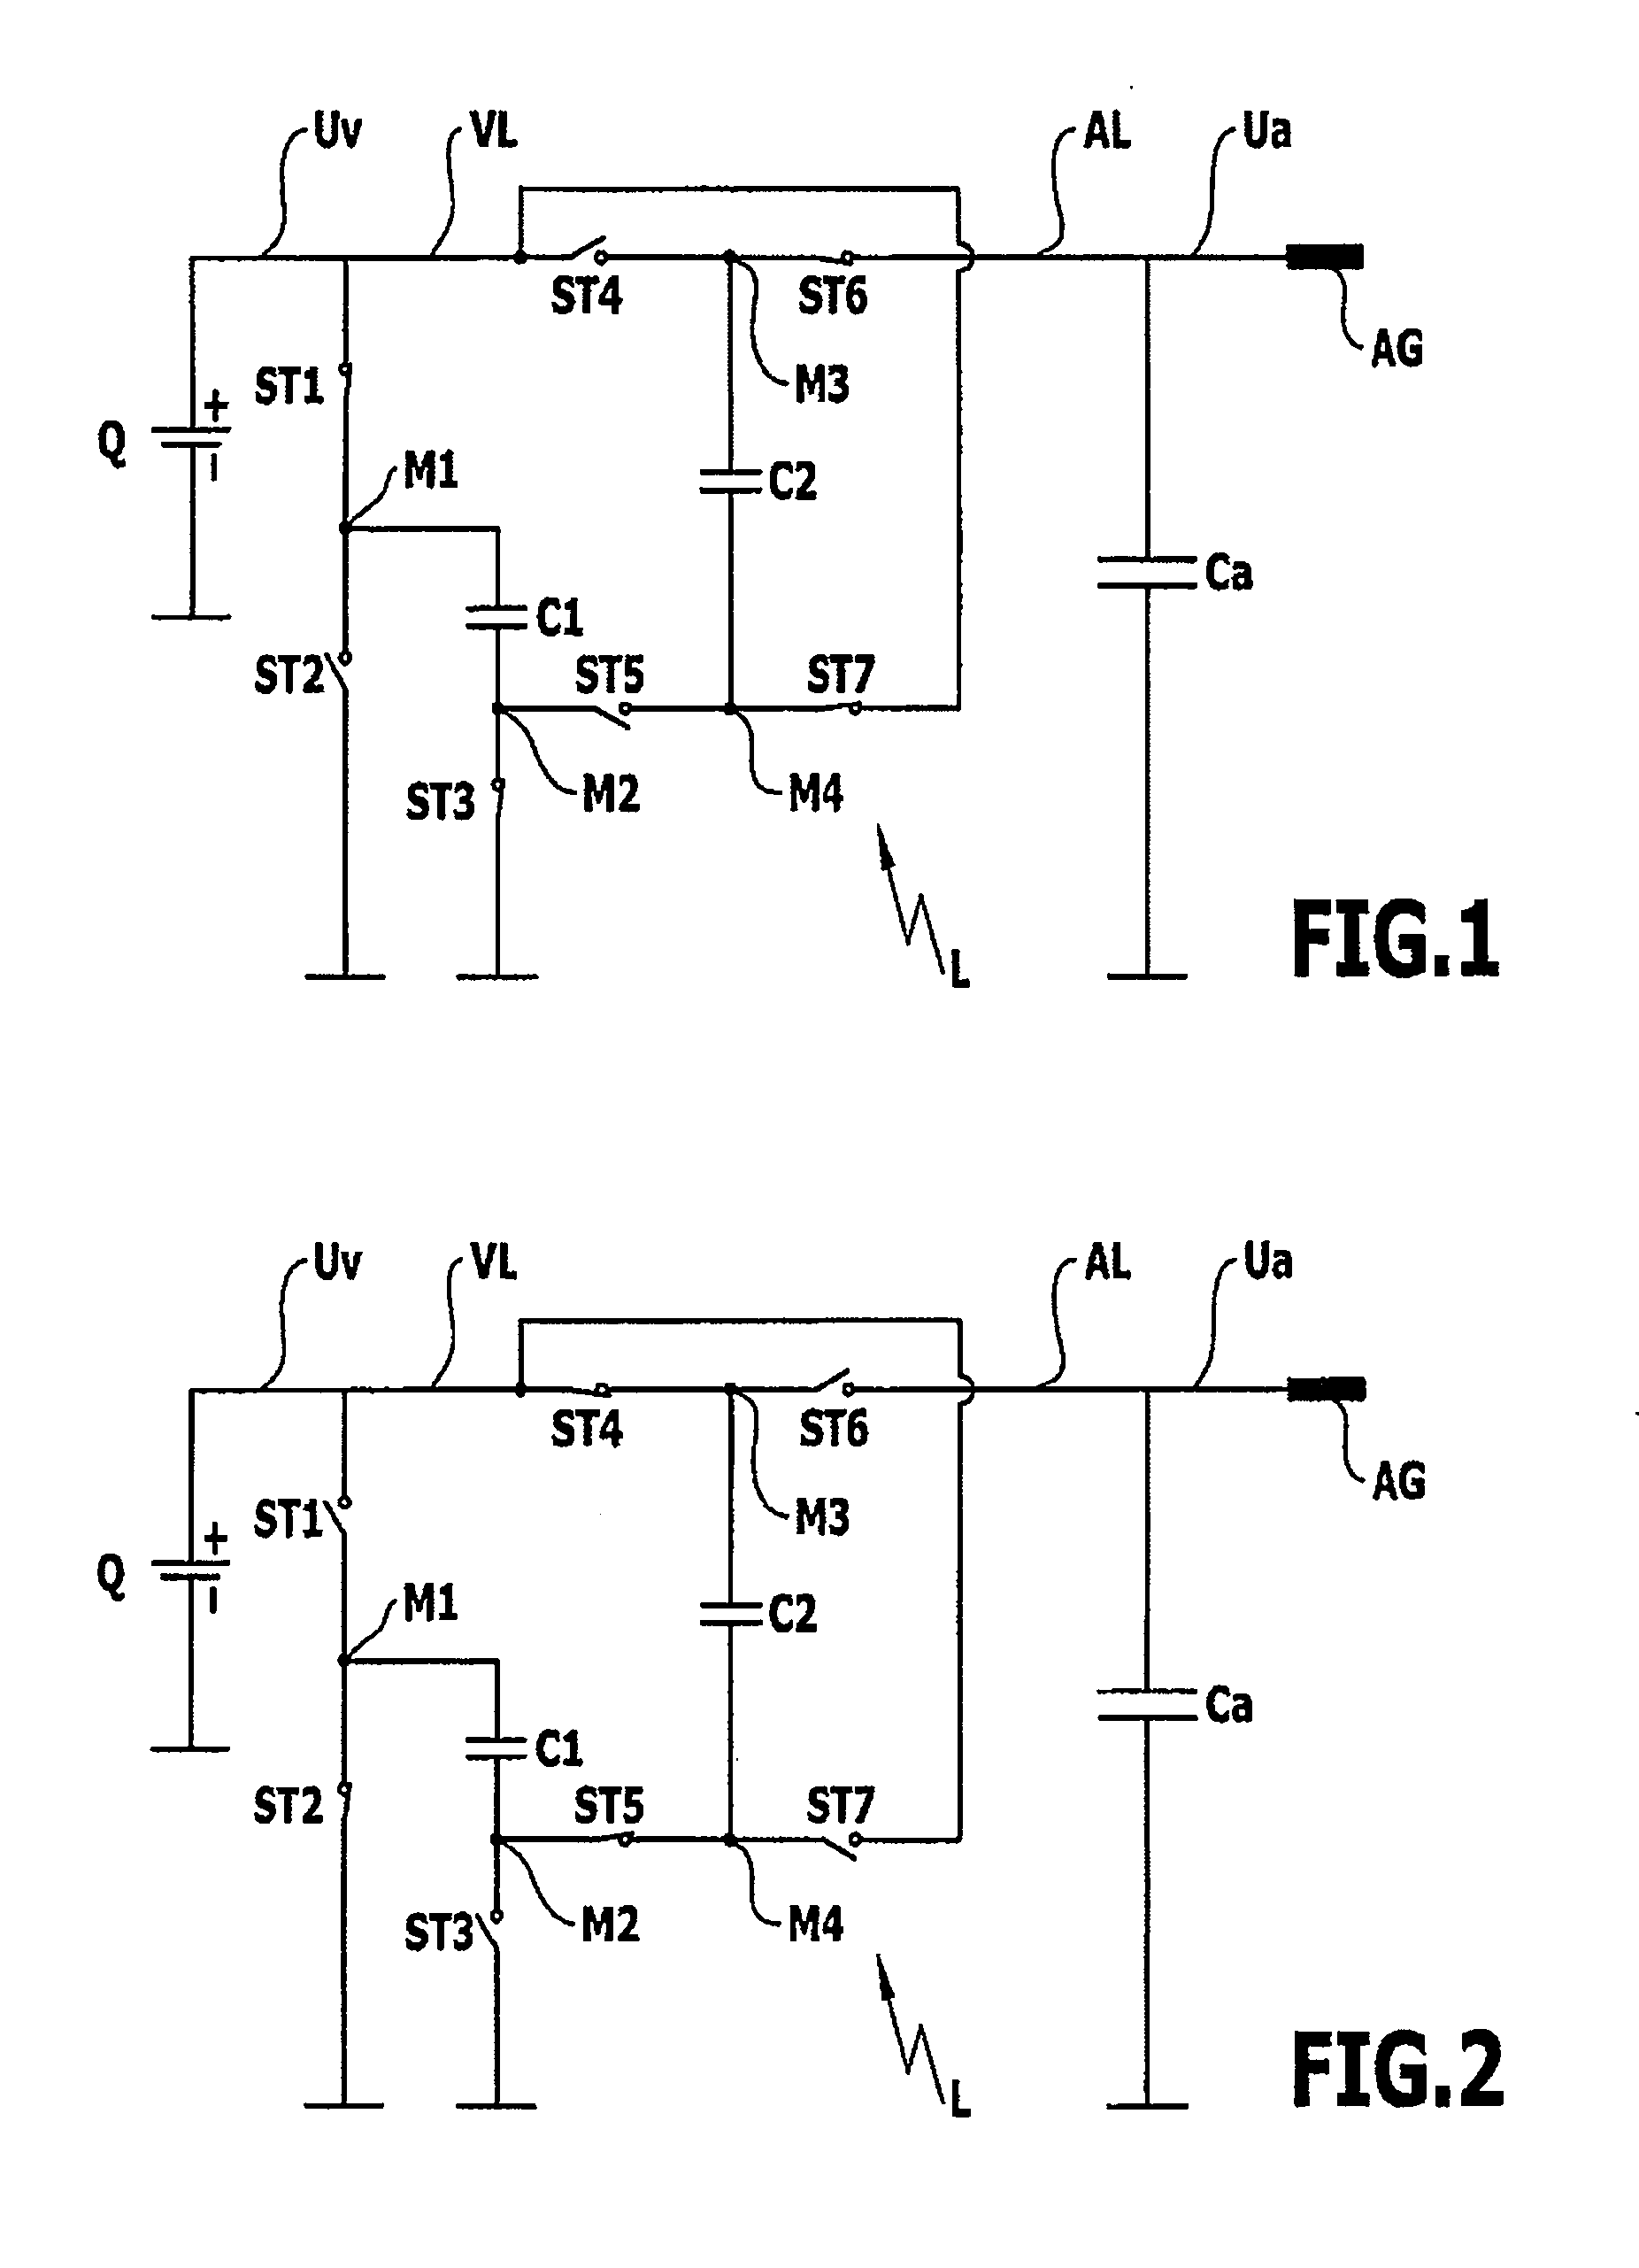 Power supply having a charge pump circuit